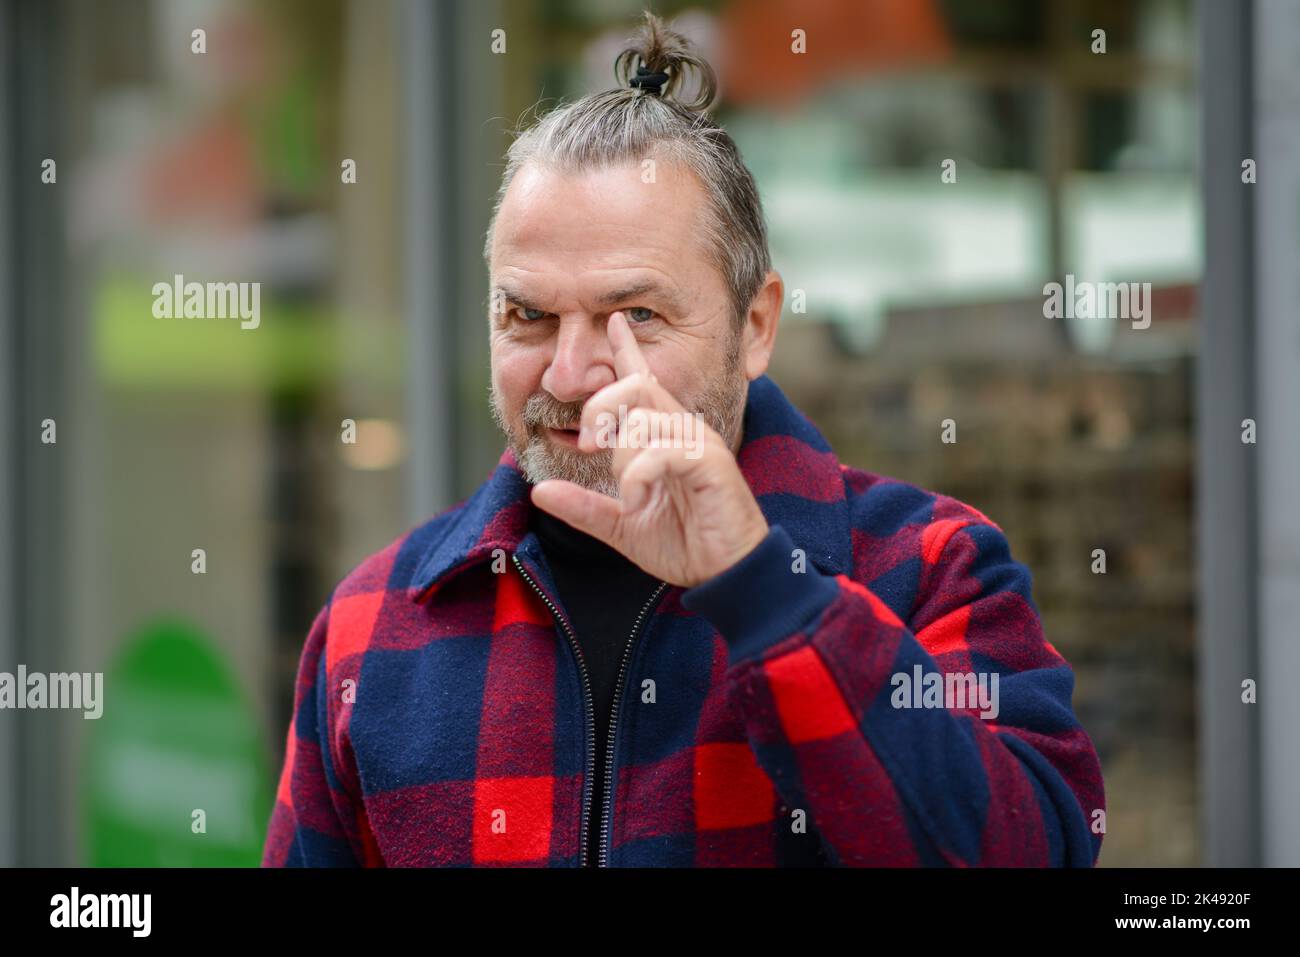 Middle aged man with a messy bun in a red and blue lumberjack style jacket is standing in a shopping street and pointing to his front eye Stock Photo